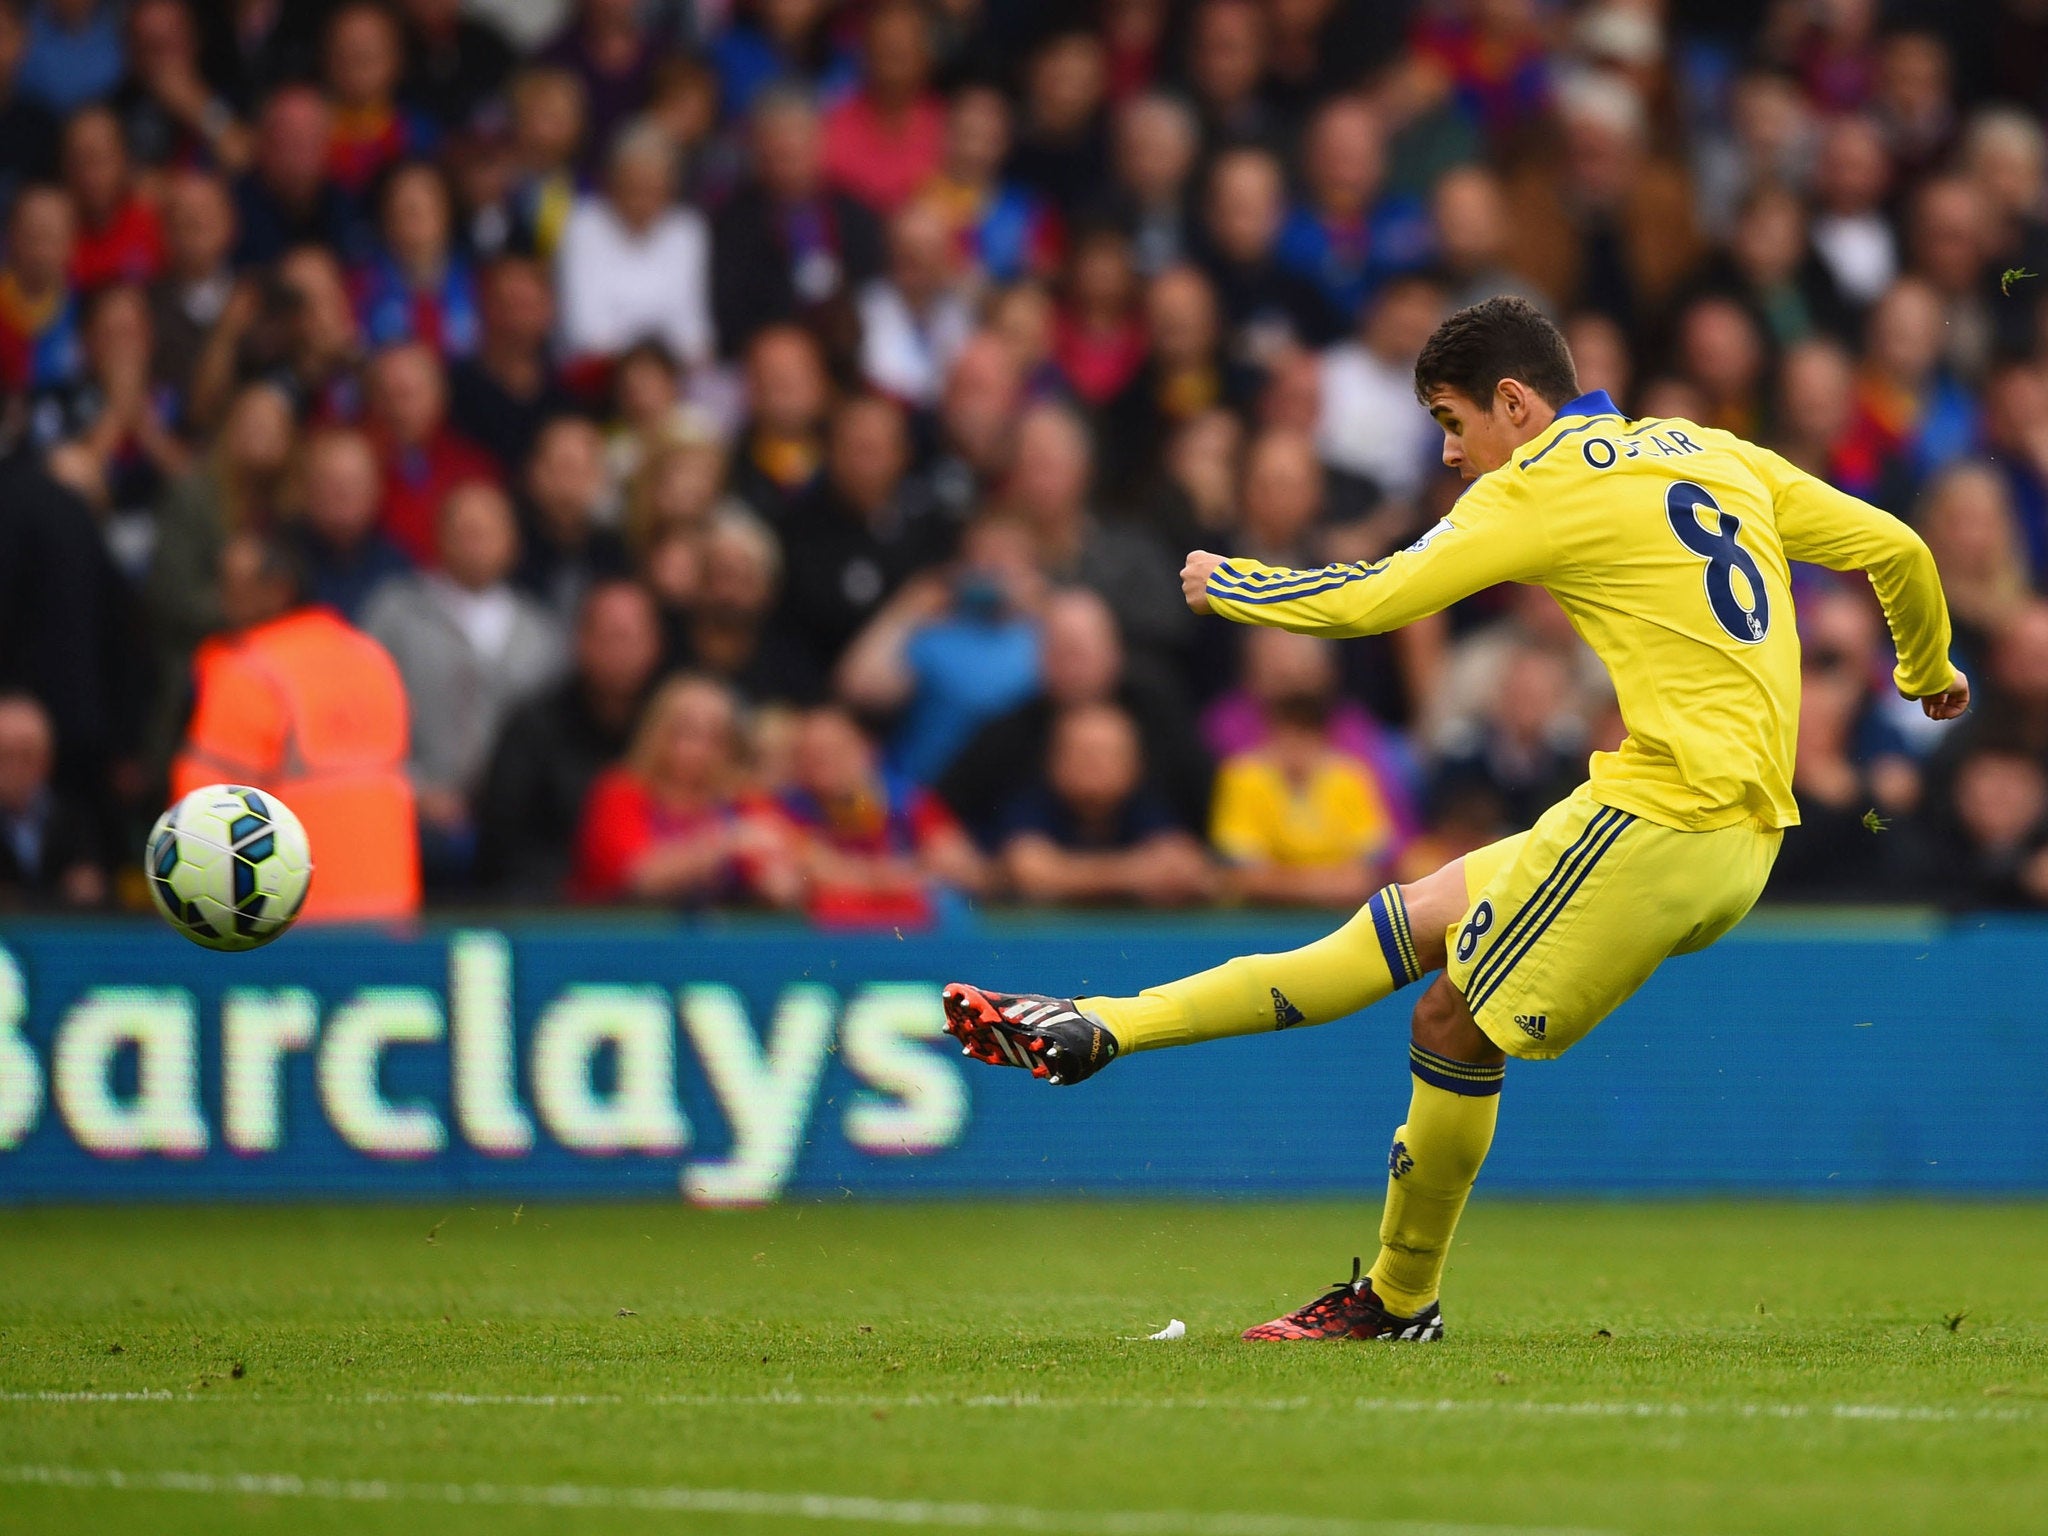 Oscar scores for Chelsea against Crystal Palace